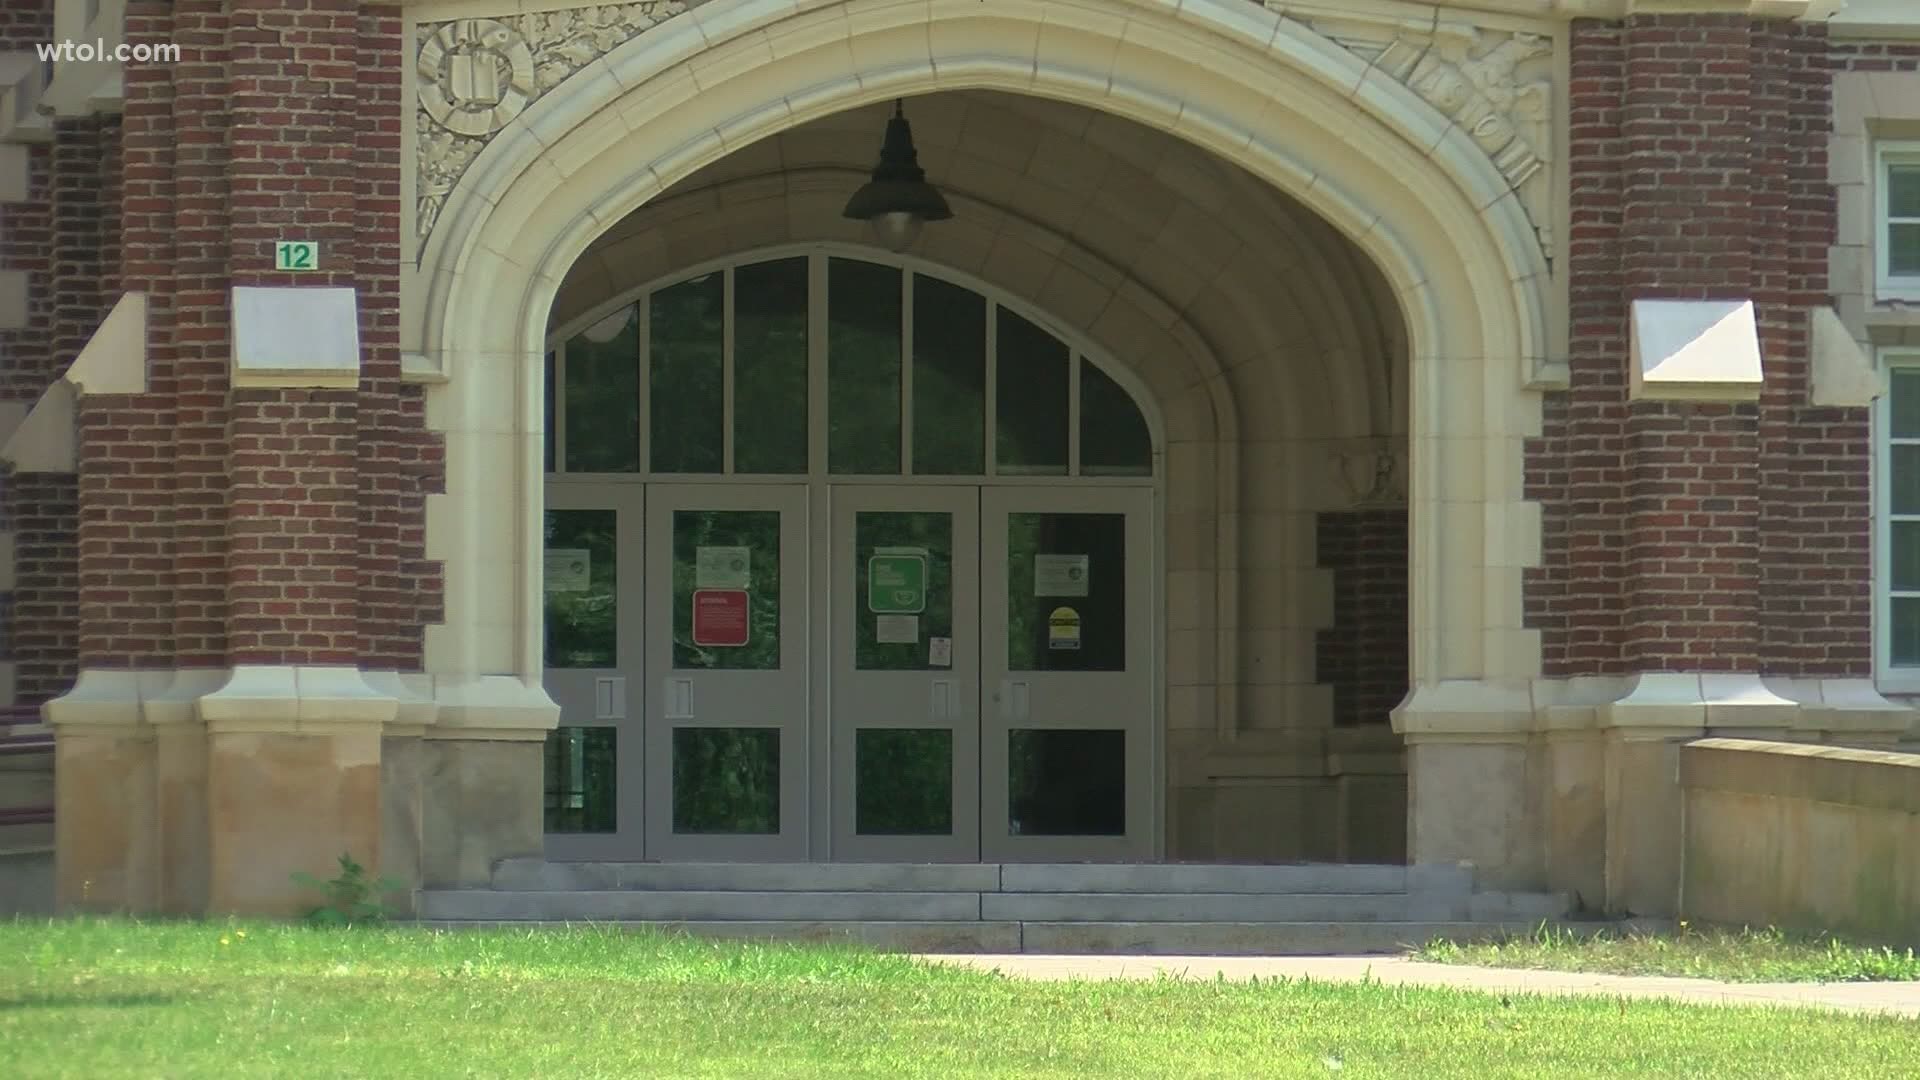 School districts across Lucas County are planning to have students in classrooms by the end of October. But there are still concerns as the return dates approach.